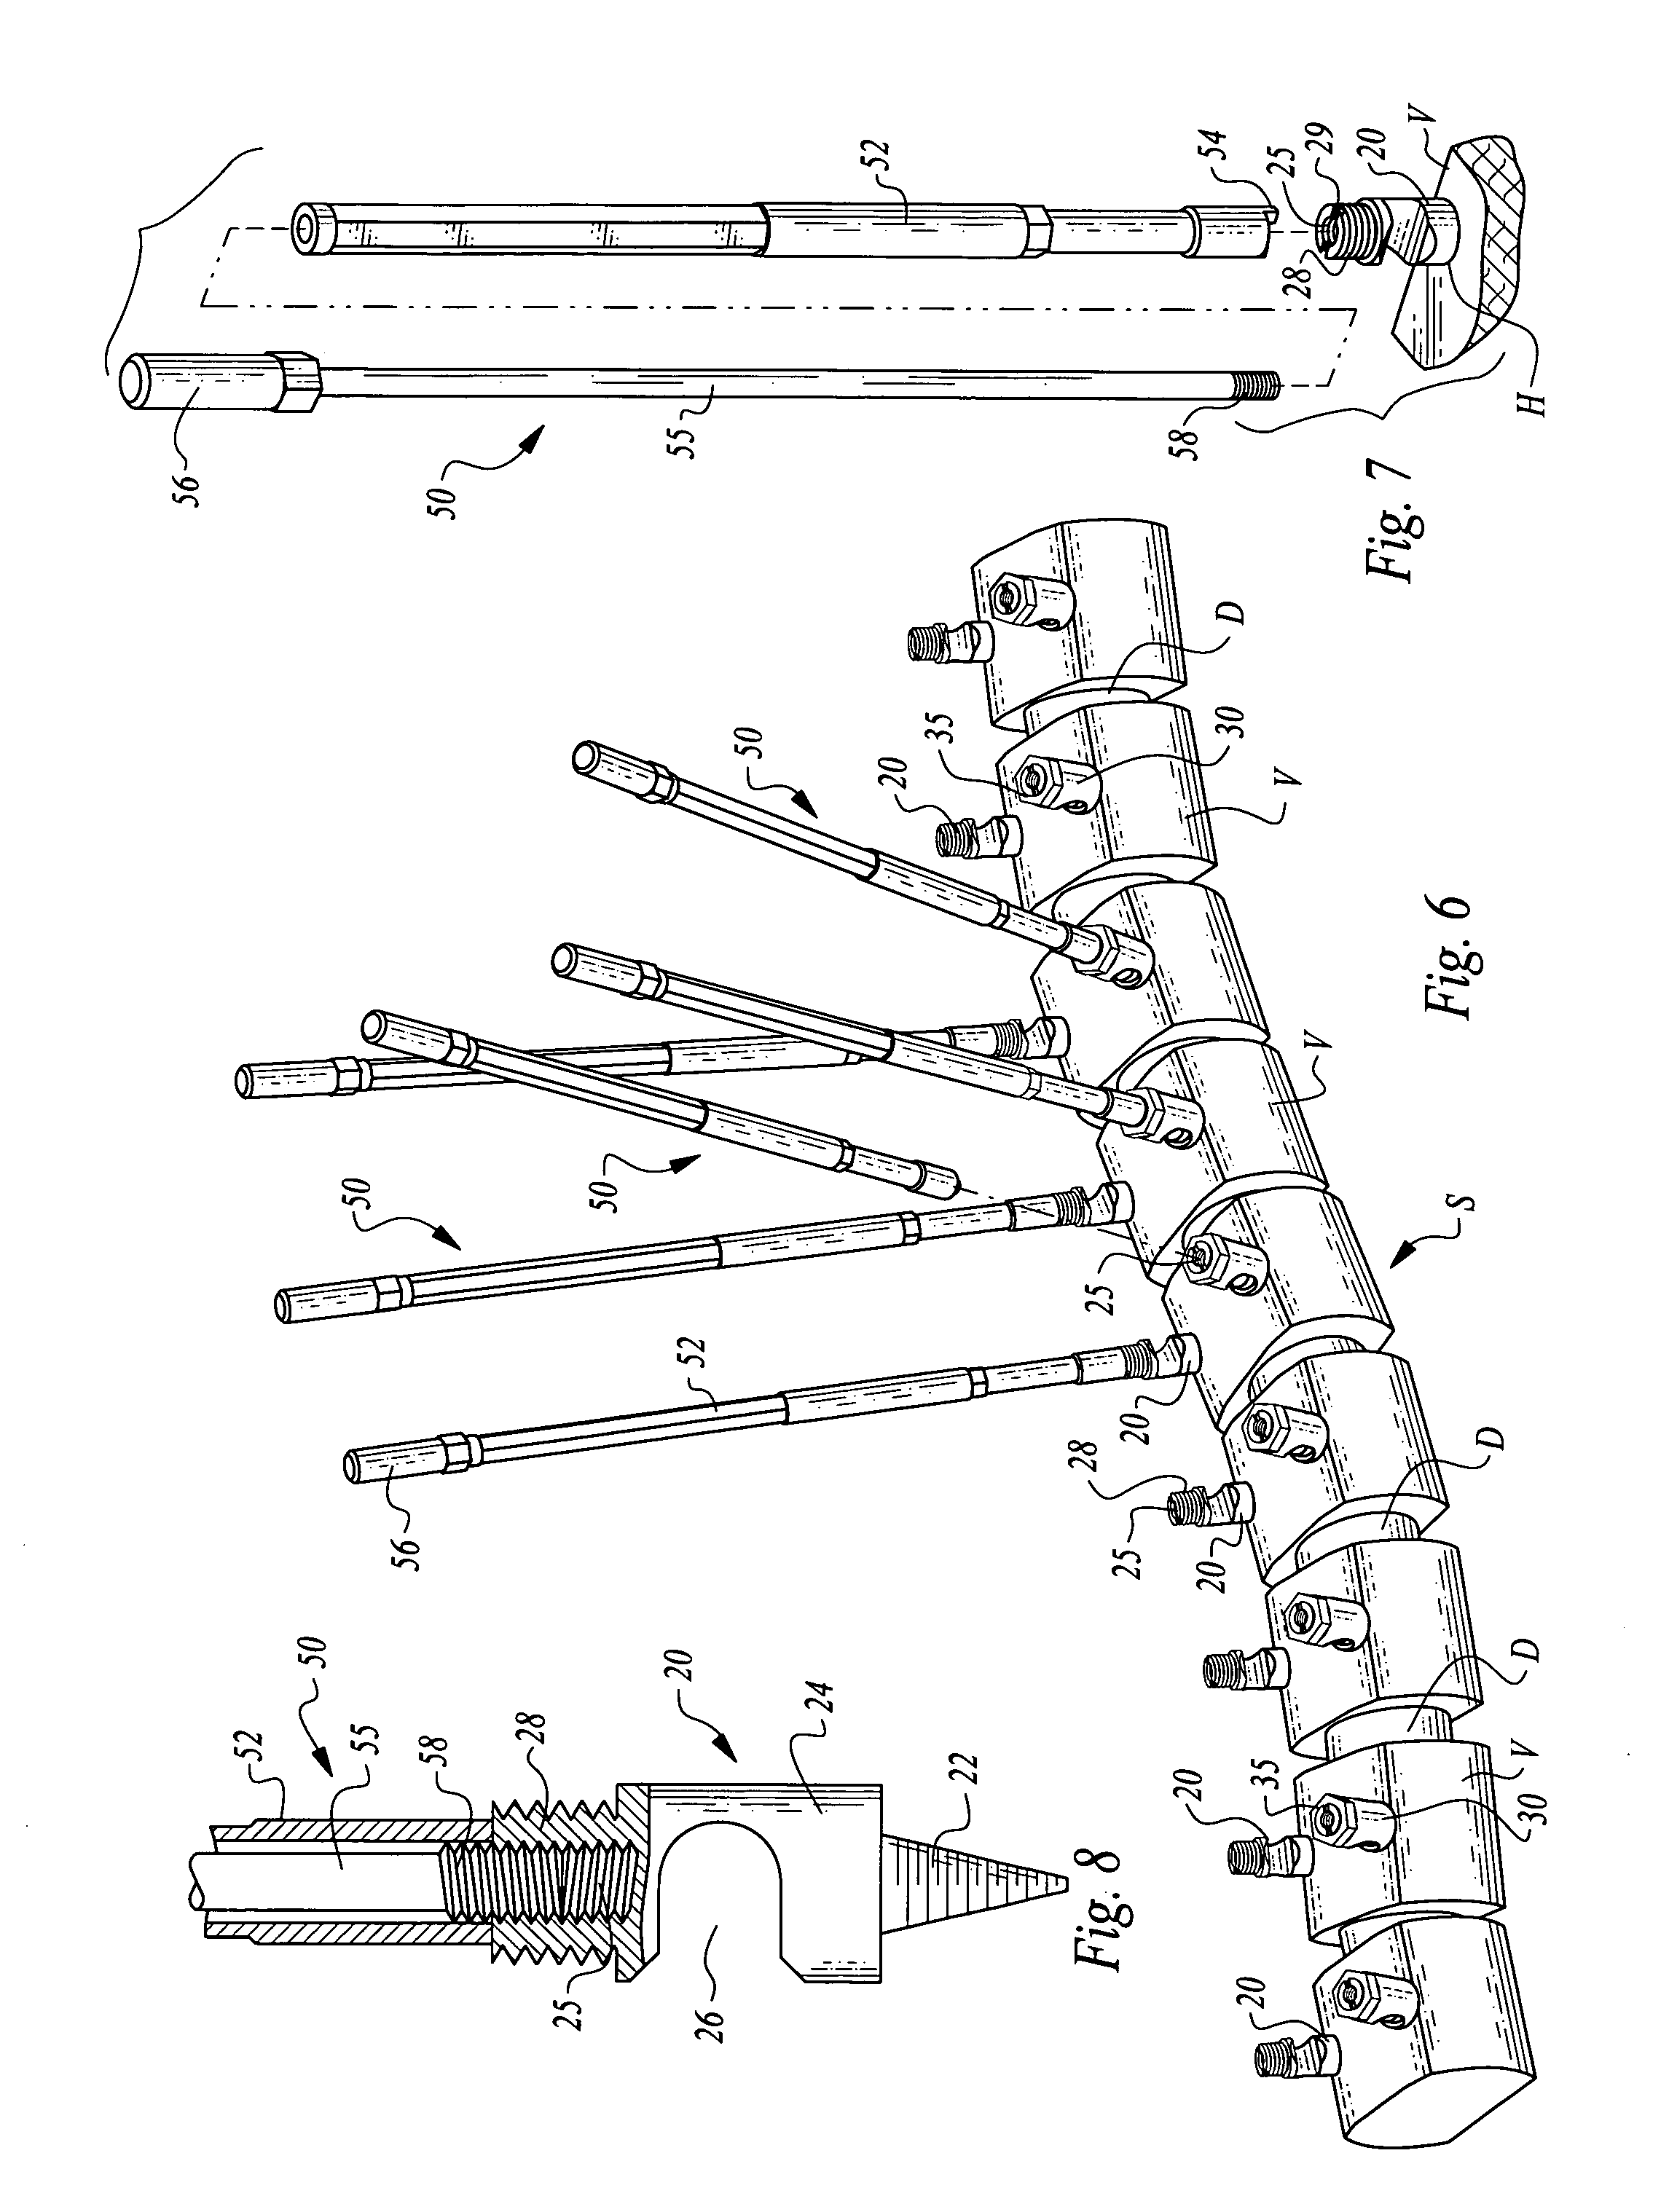 Scoliosis de-rotation system and method